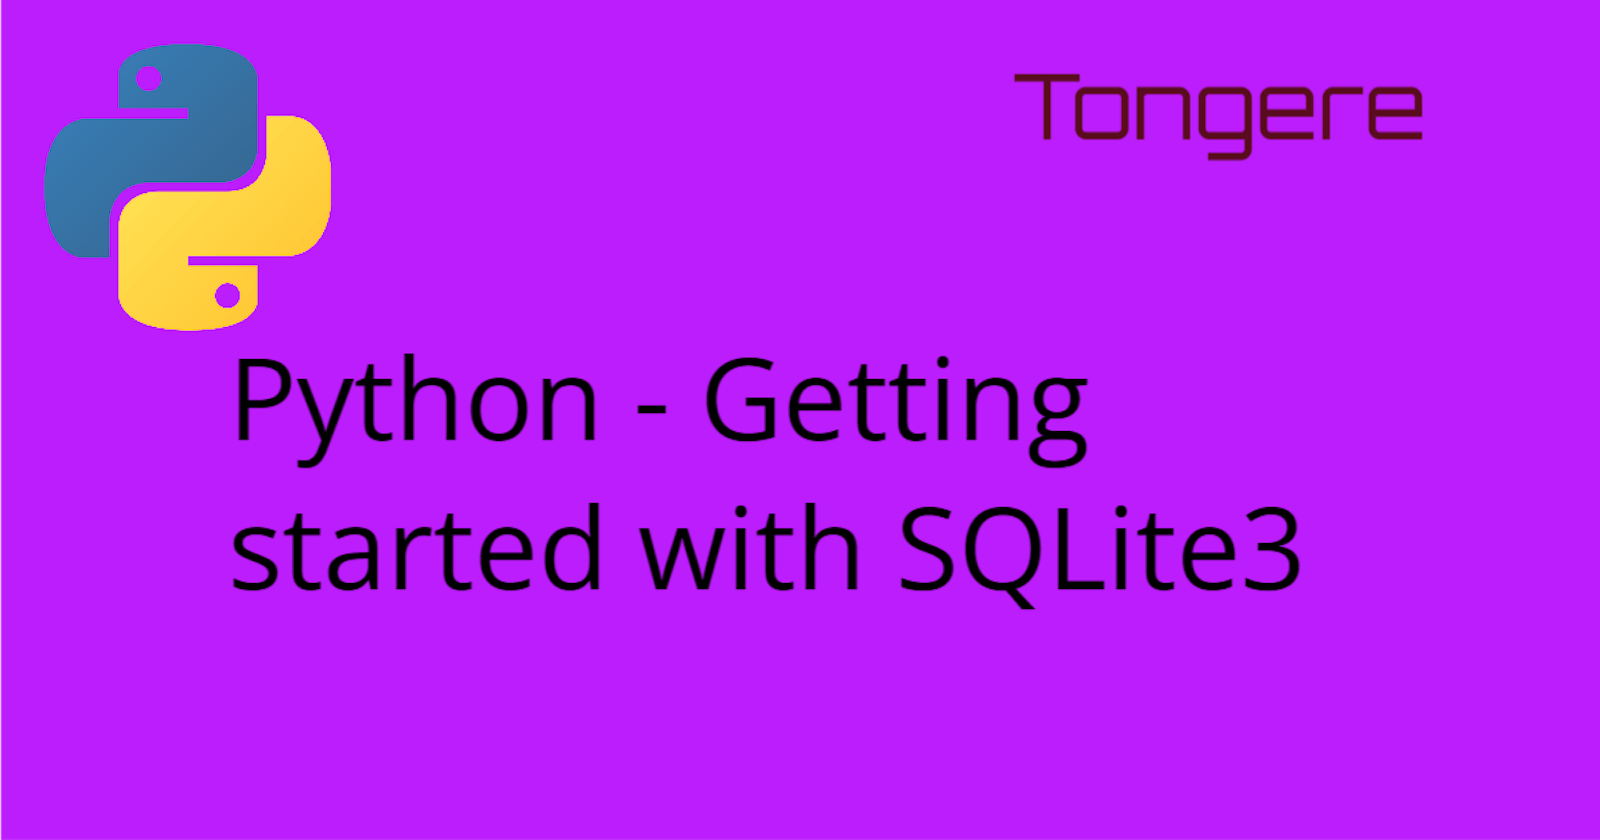 Python - Getting started with SQLite3